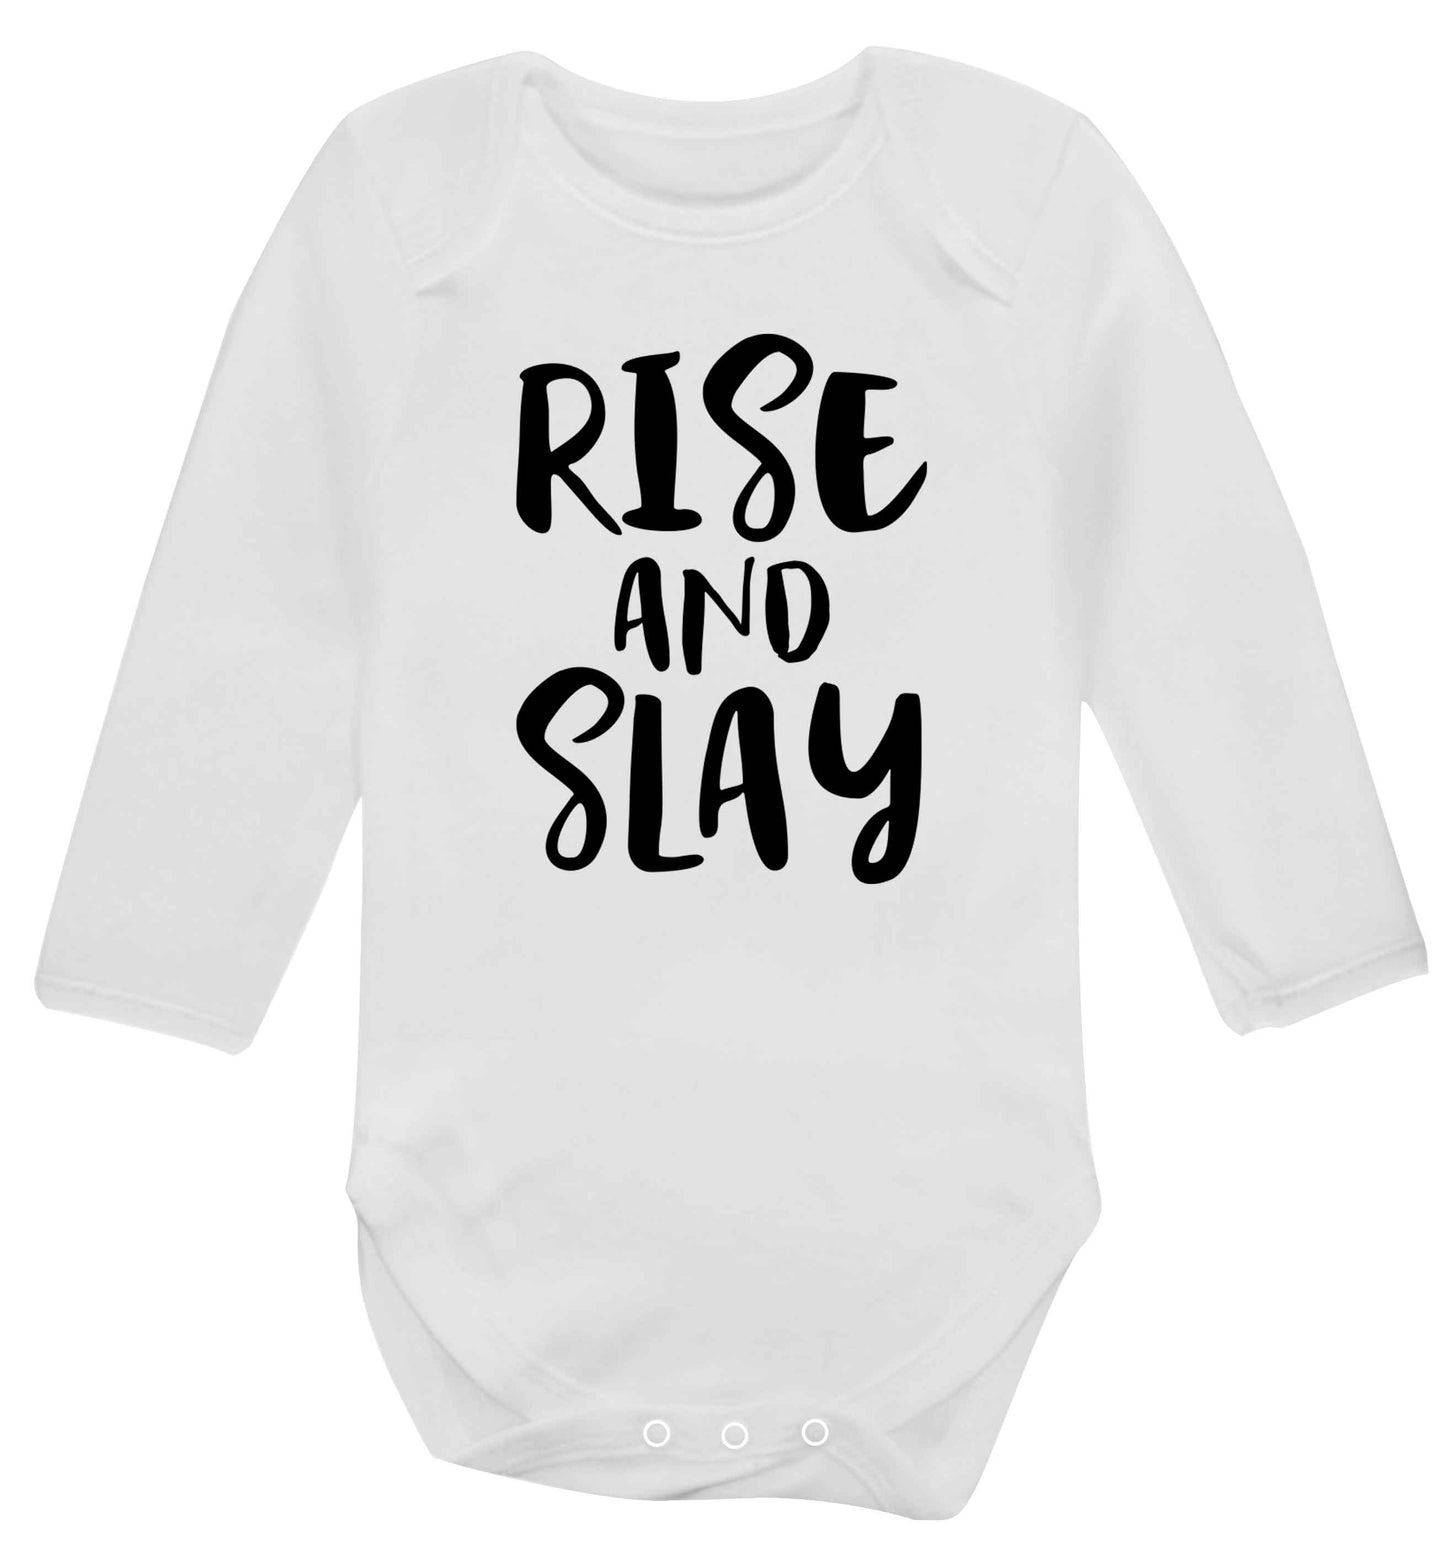 Rise and slay Baby Vest long sleeved white 6-12 months